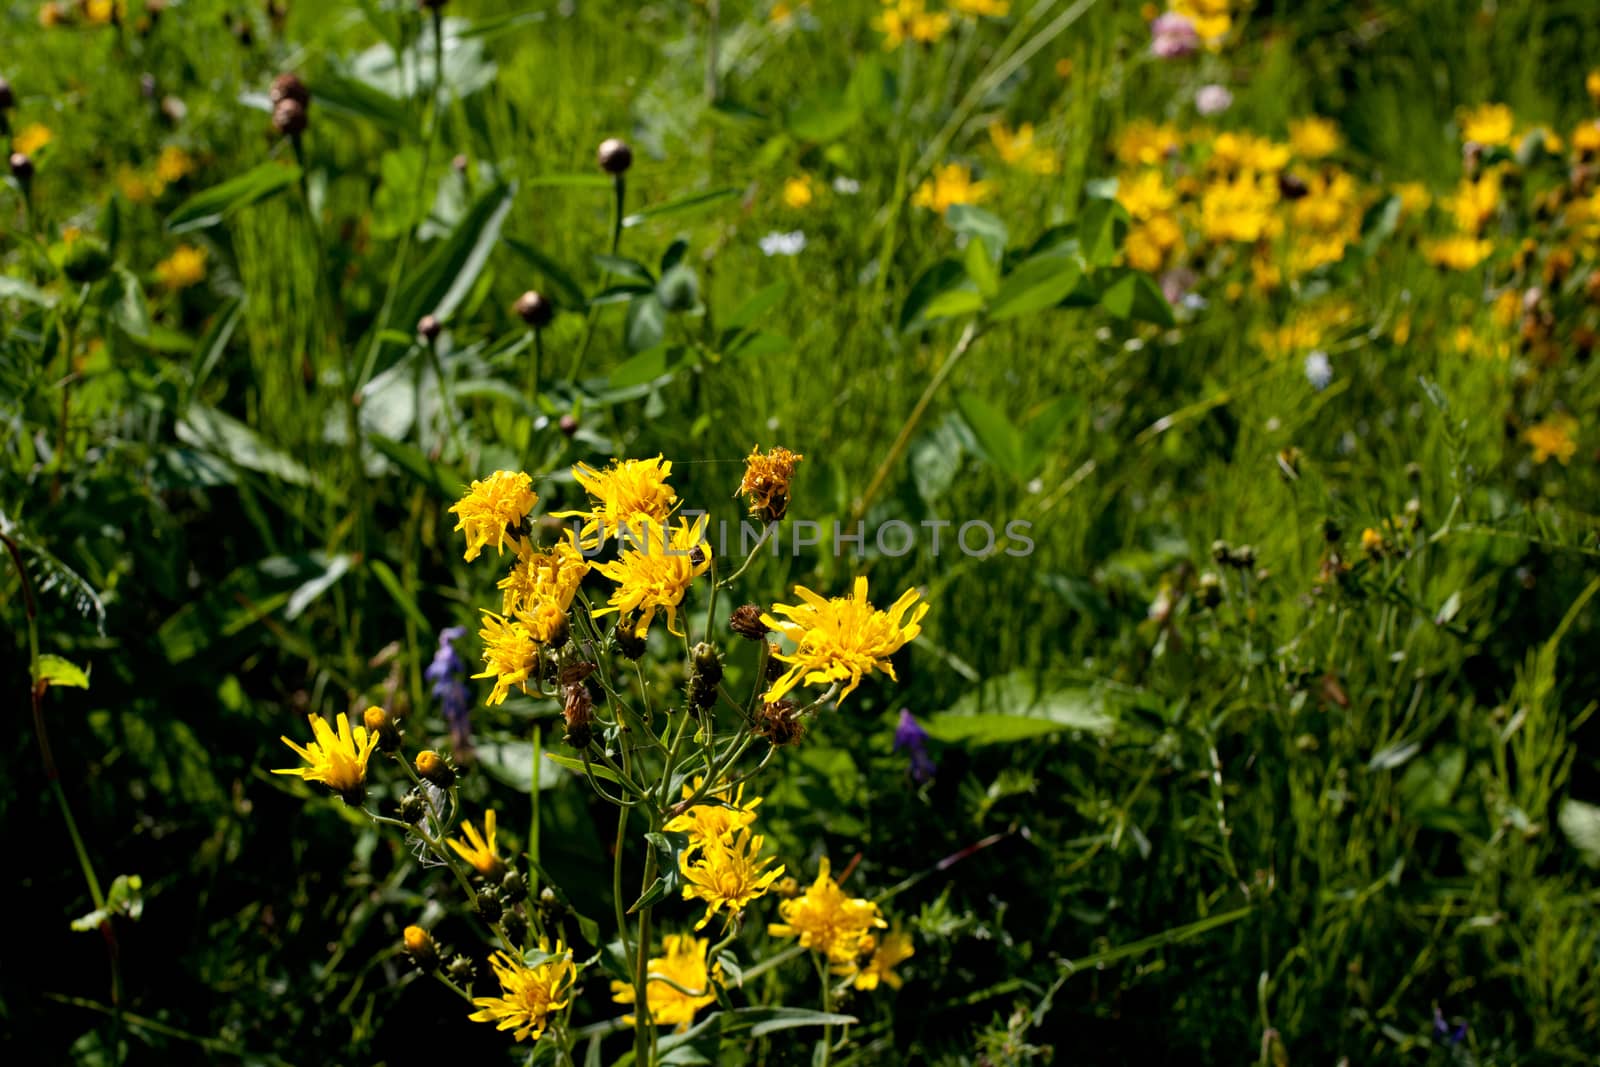 Many yellow wildflowers in green field in sunny day
